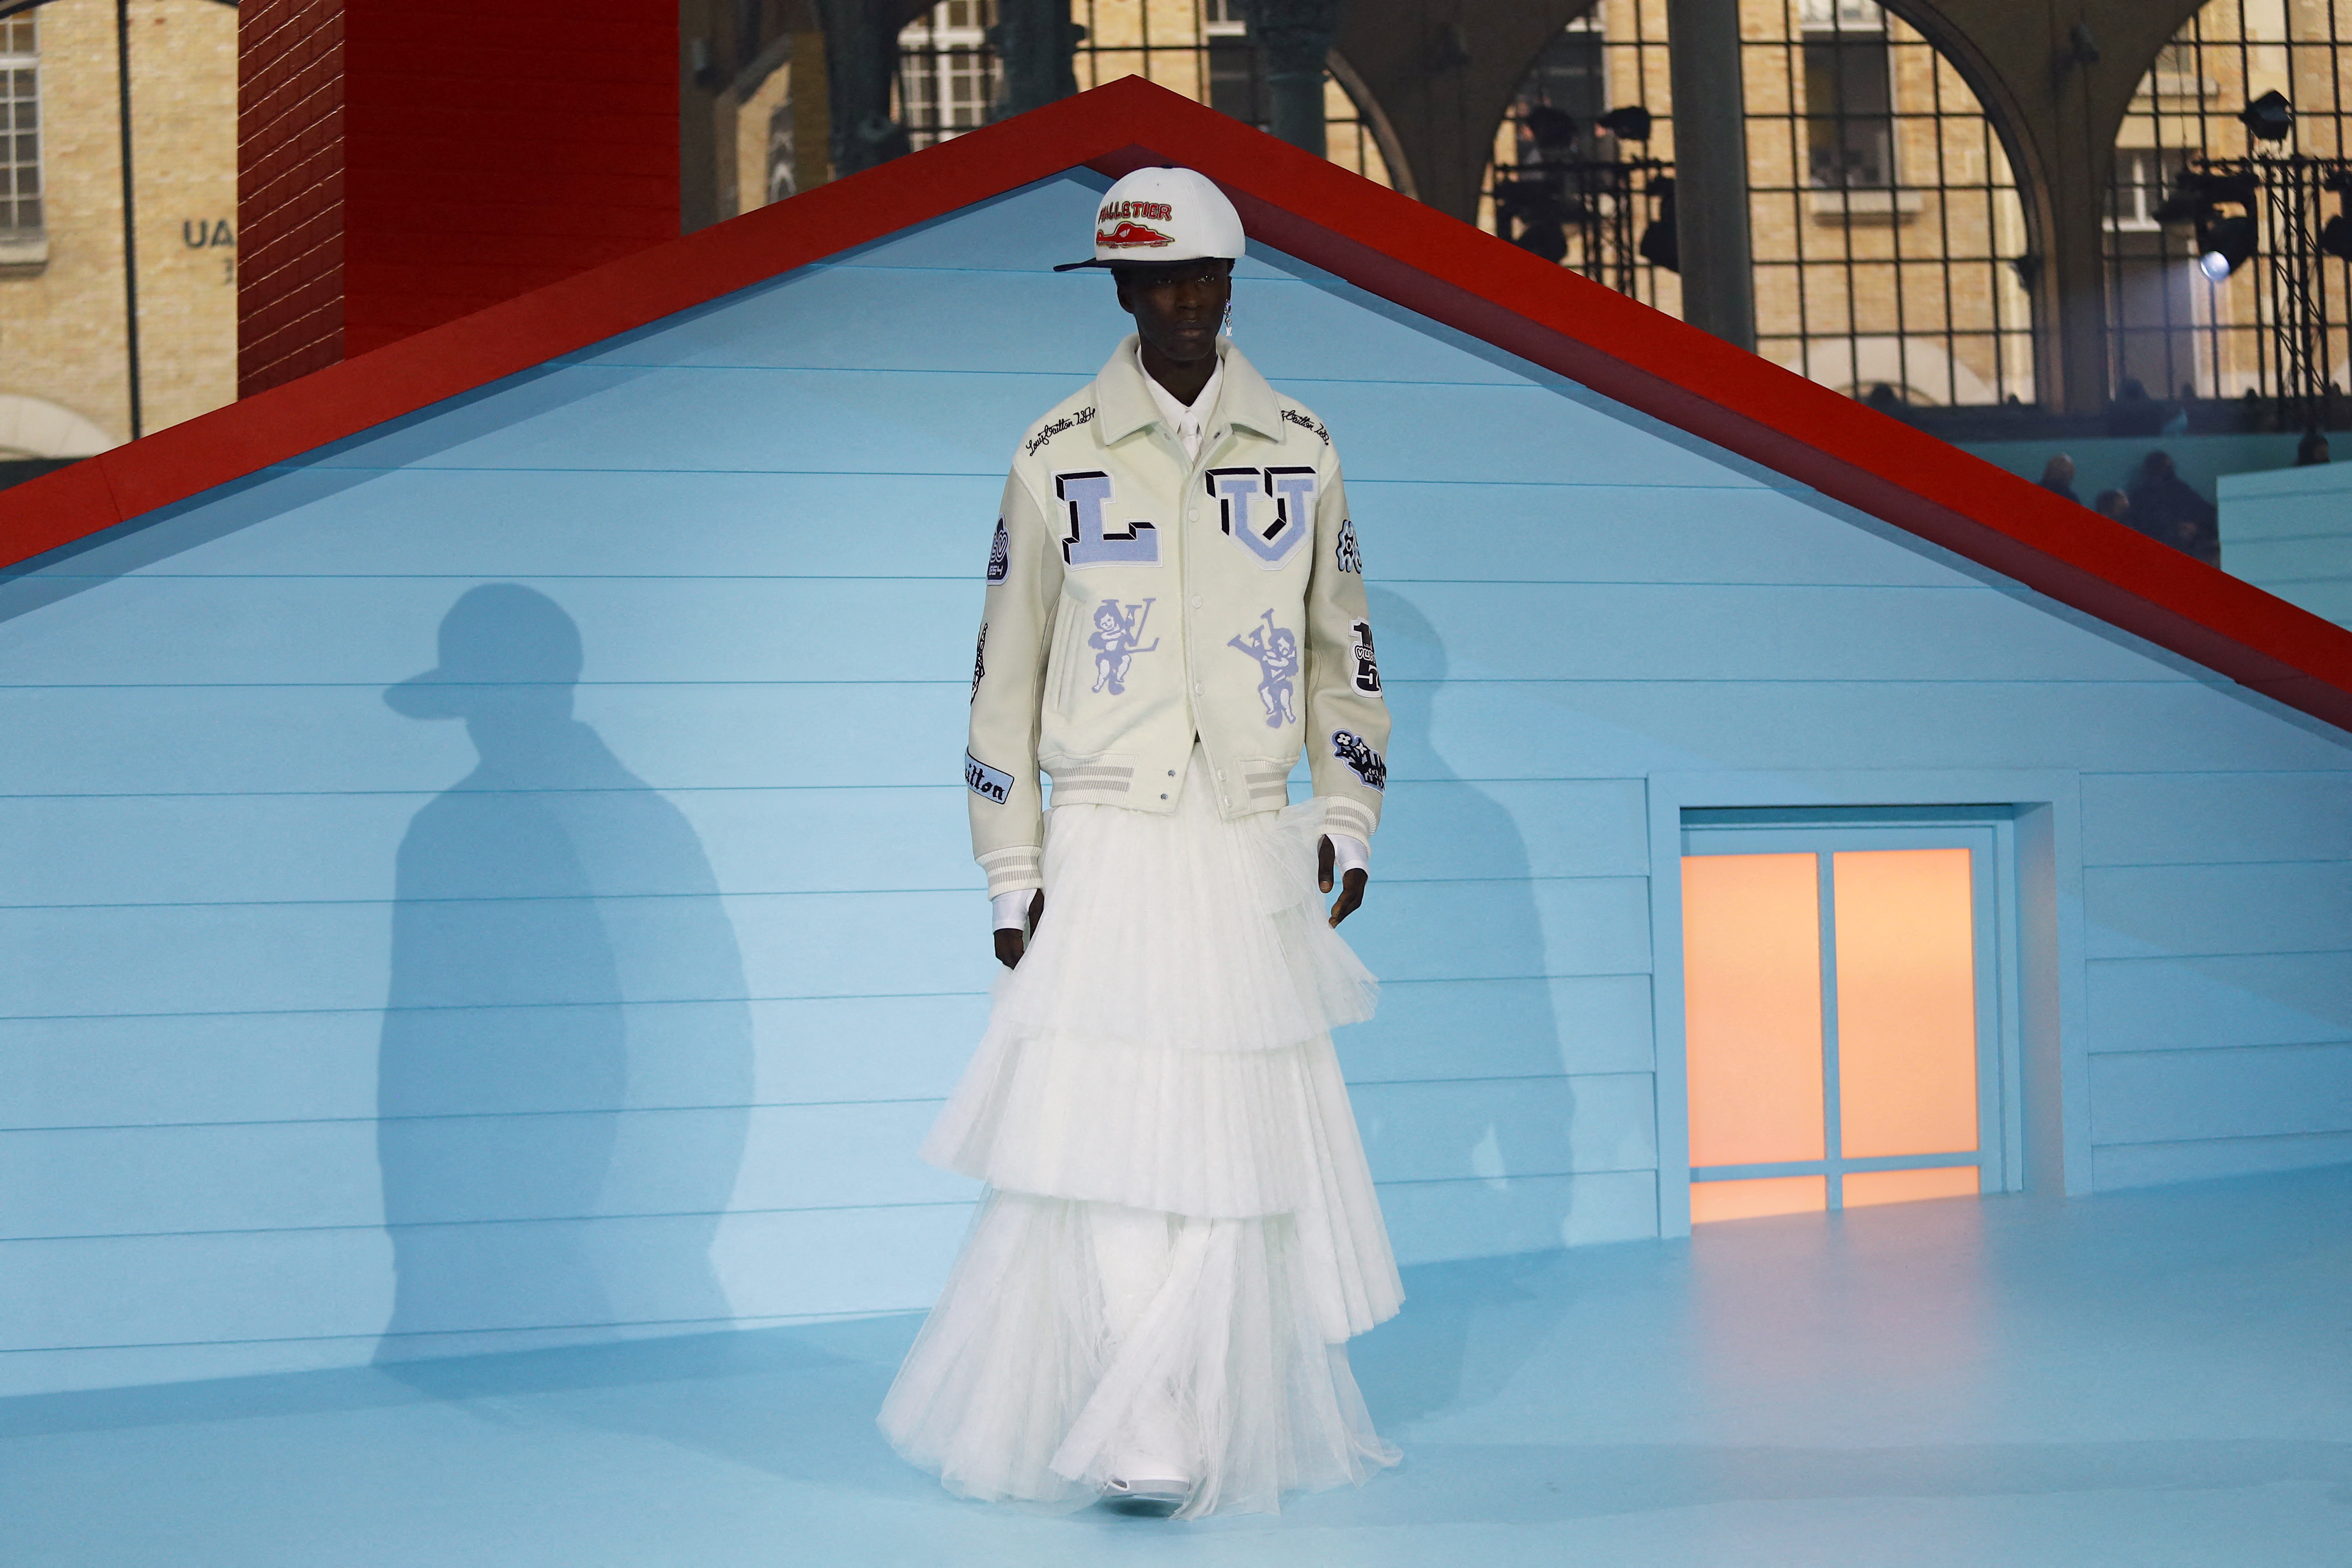 Louis Vuitton presents the last collection designed by Virgil